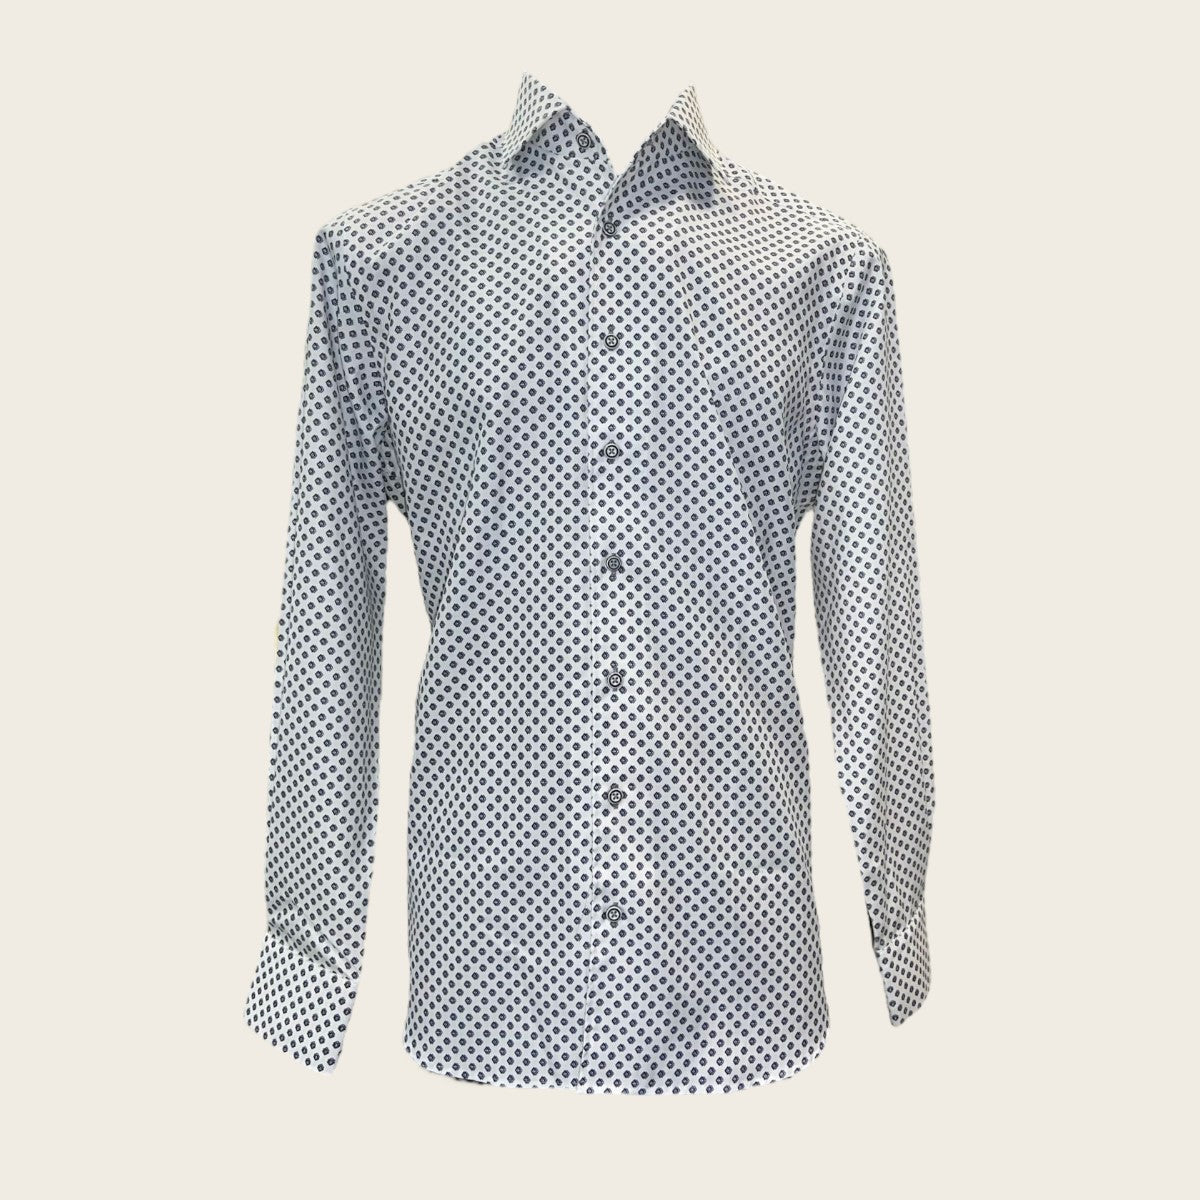 White shirt for men with geomatric dots motifs